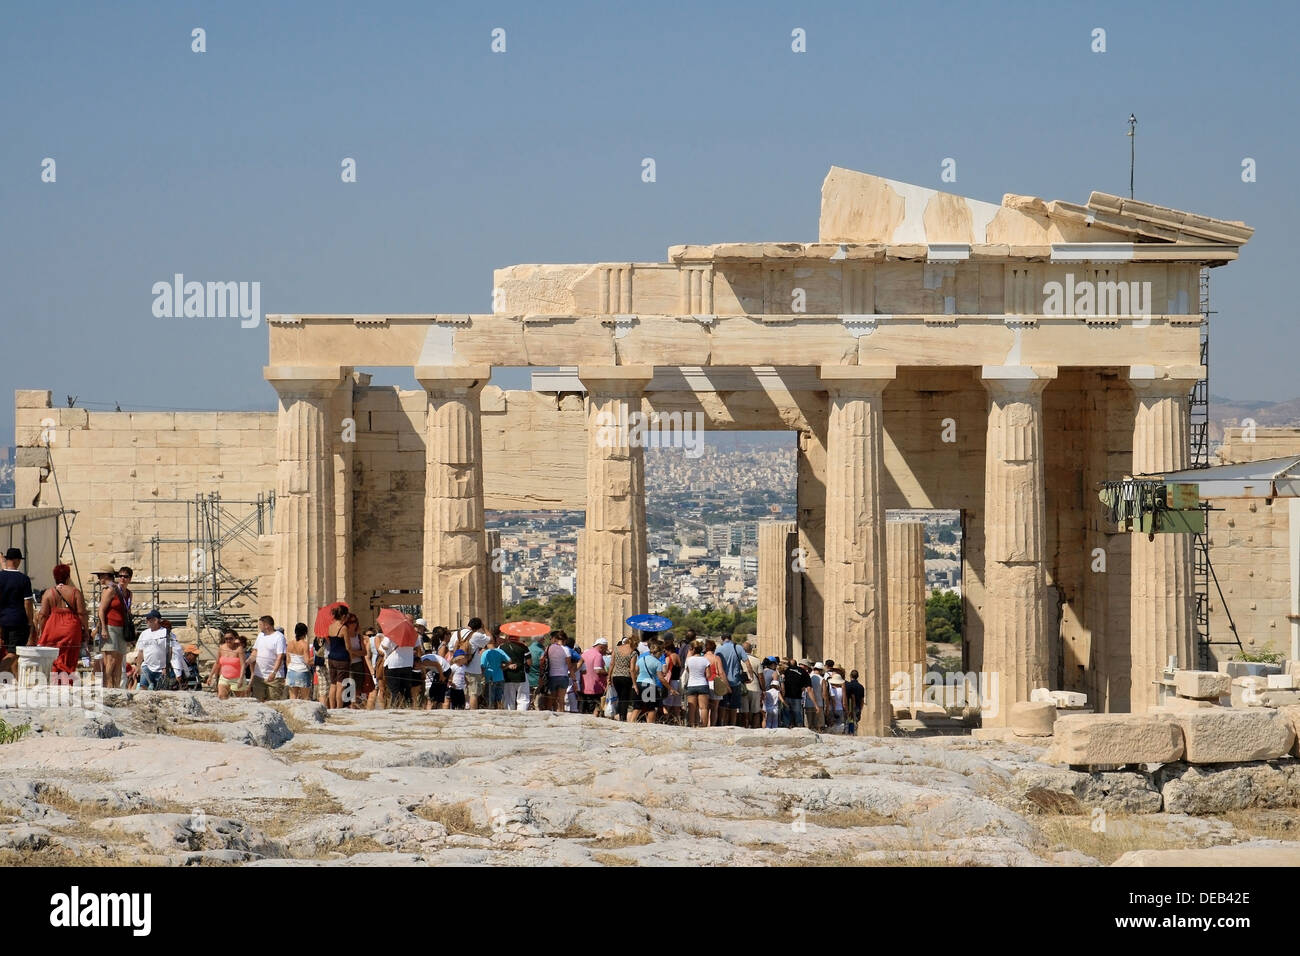 Crowds visiting the archaeological site of the Acropolis in Athens, Greece. Stock Photo